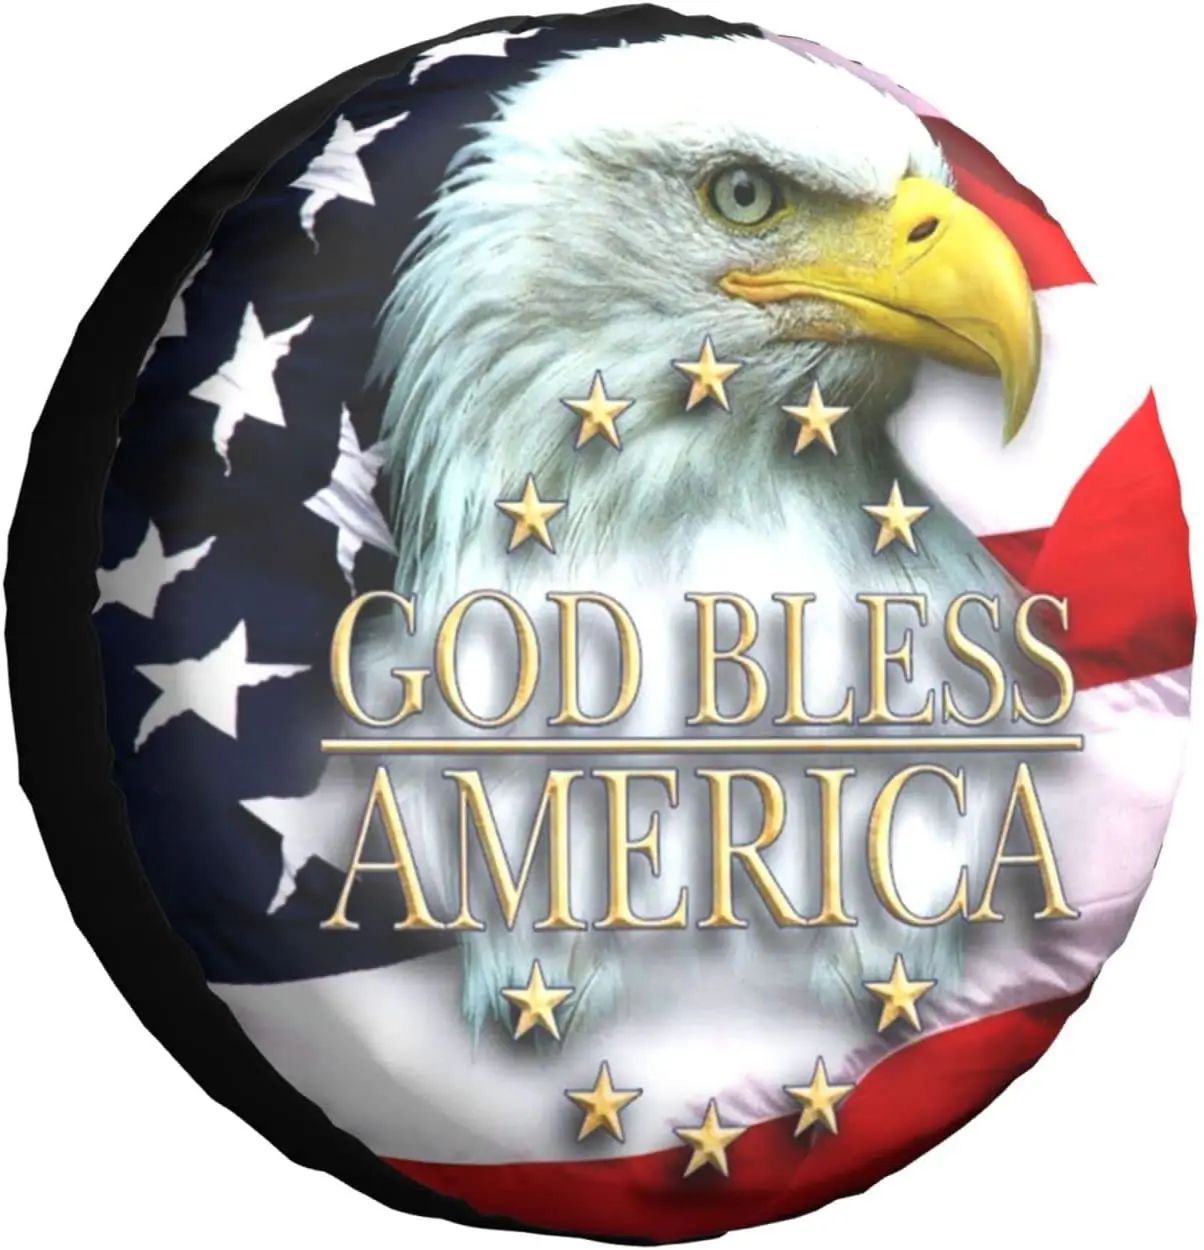 

God Bless America Us Flag Spare Tire Cover Waterproof Dust-Proof Universal Wheel Tire Covers Fit for Trailer Rv SUV Truck Camper